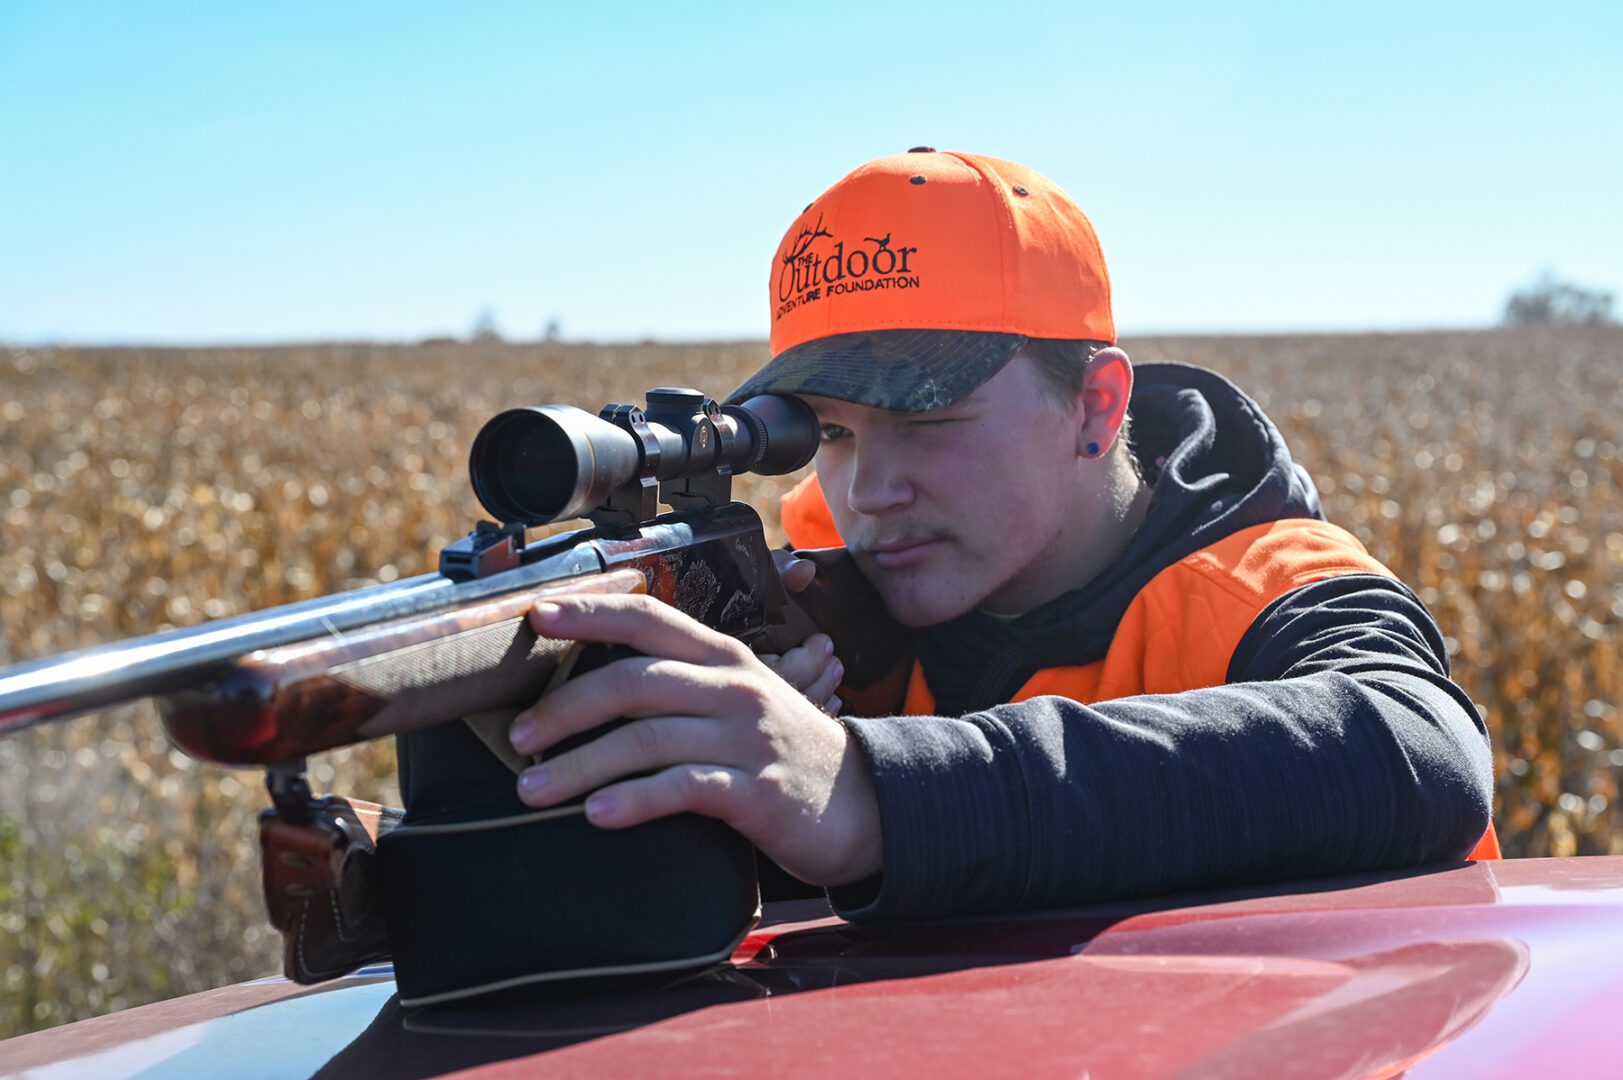 Case Thompson takes aim with his rifle over the hood of a pickup.